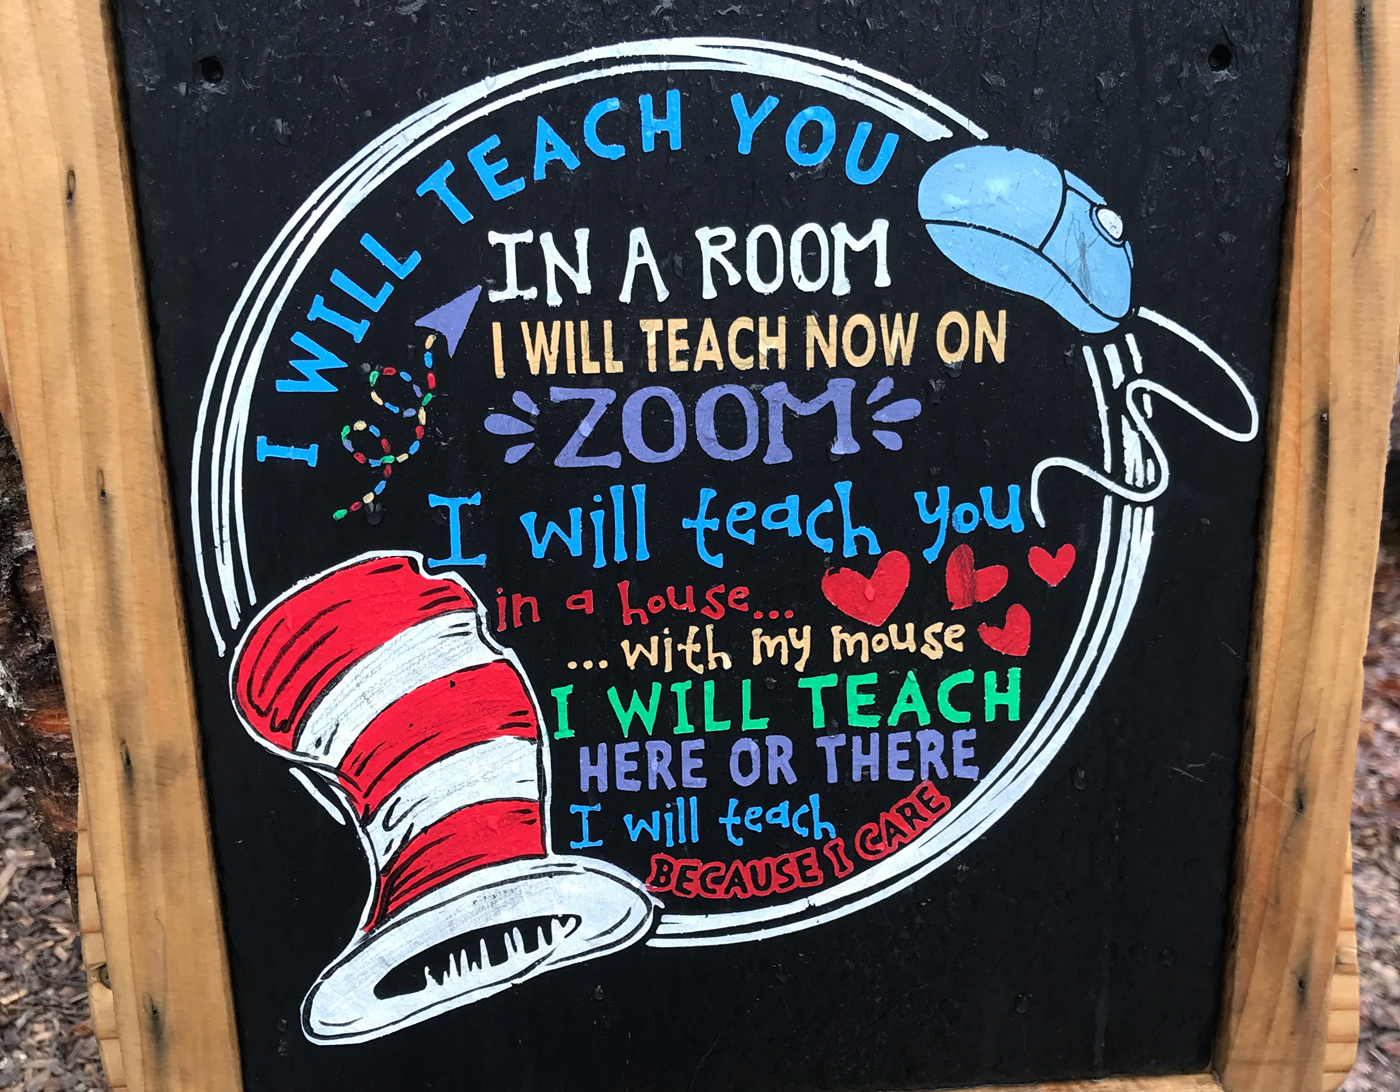 placard about teaching on zoom